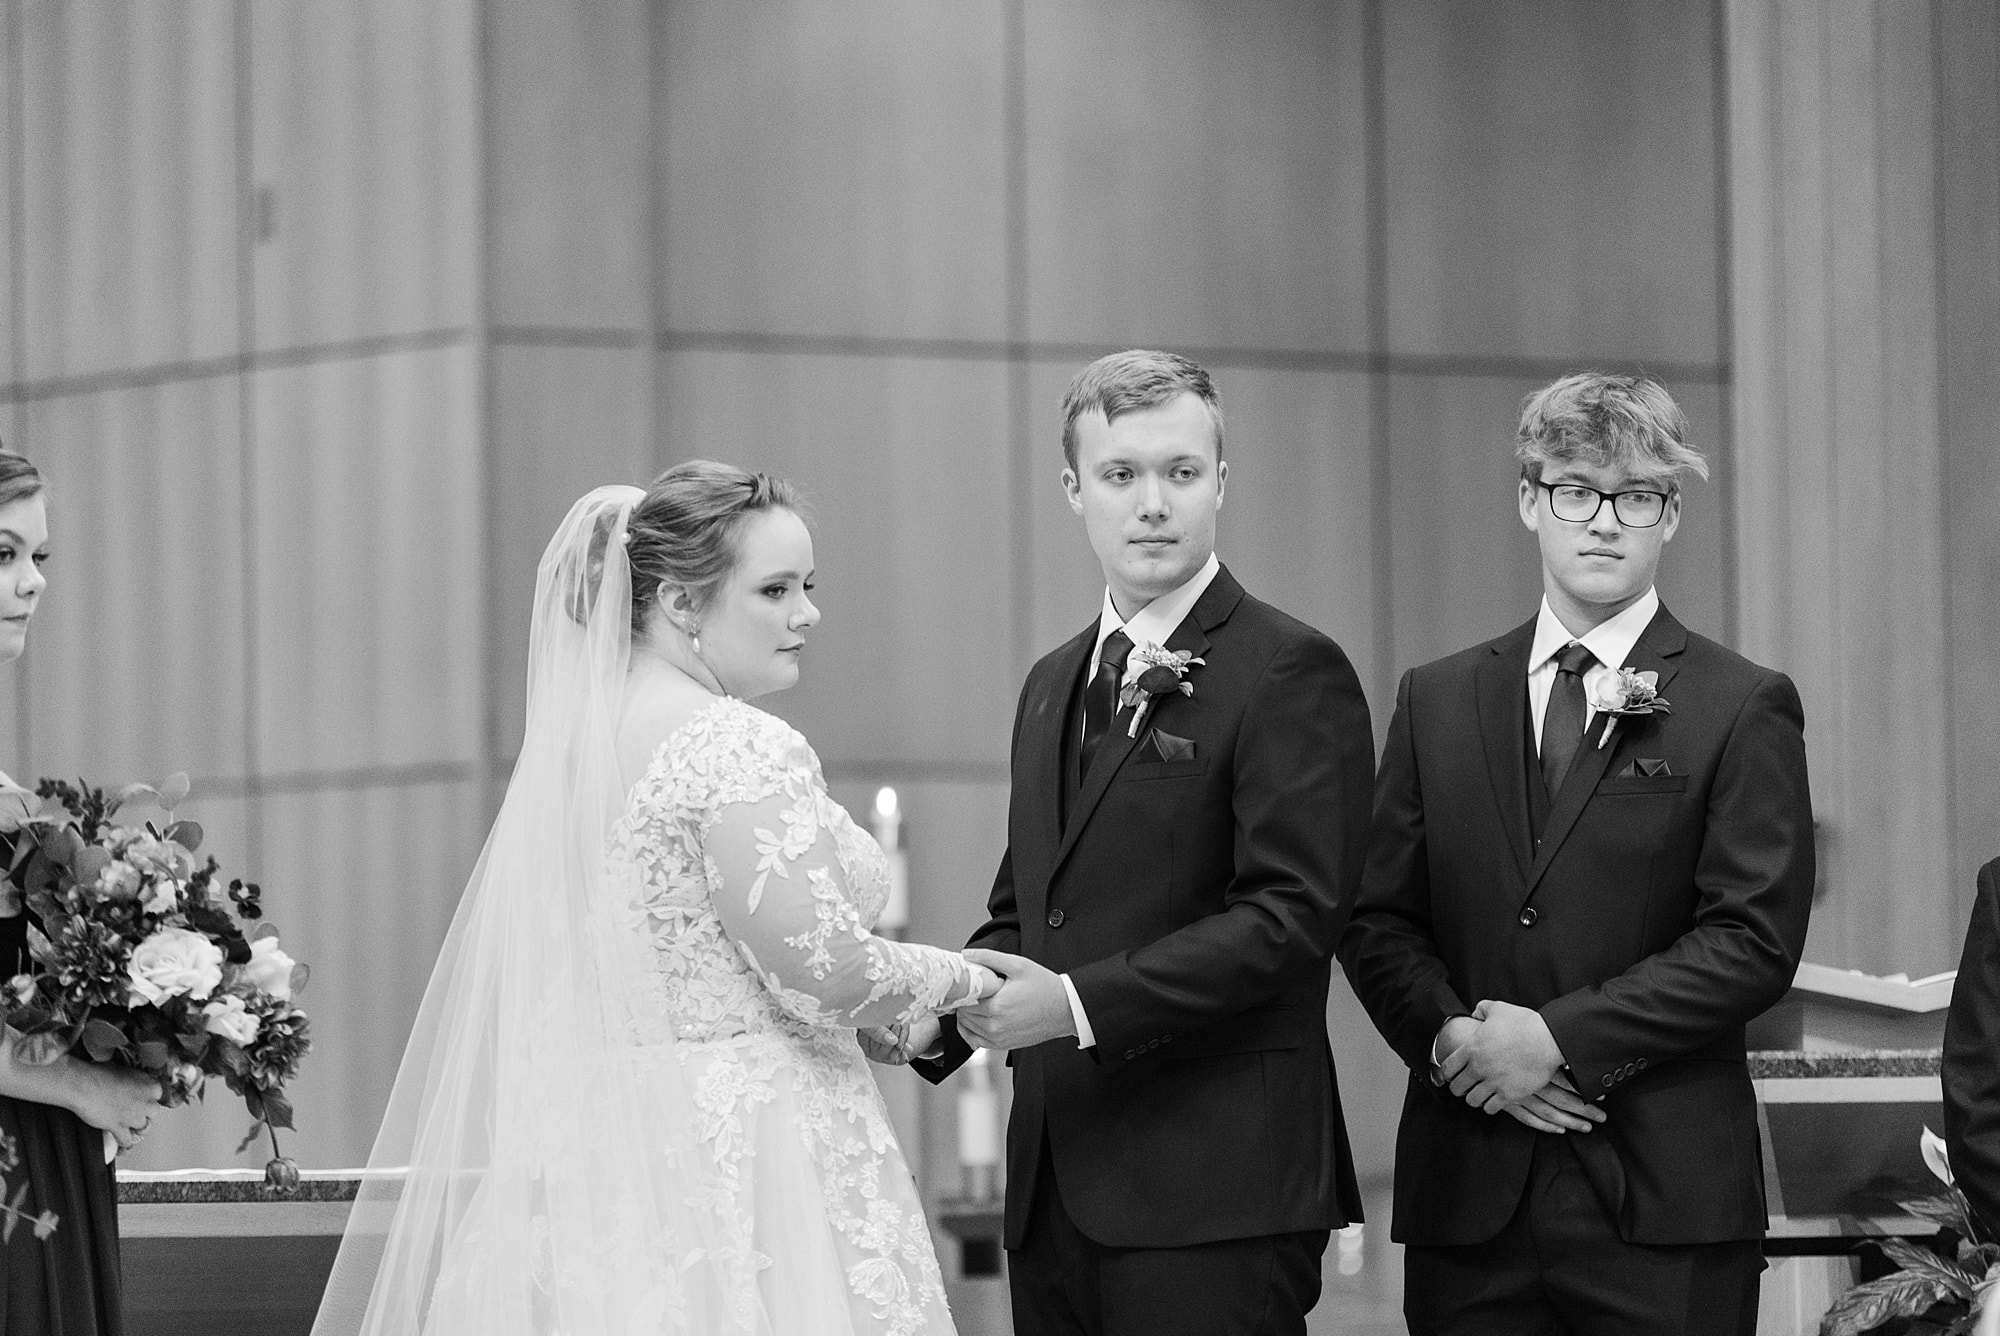 Bride and groom hold hands during their wedding ceremony at St. Joseph's Catholic Church